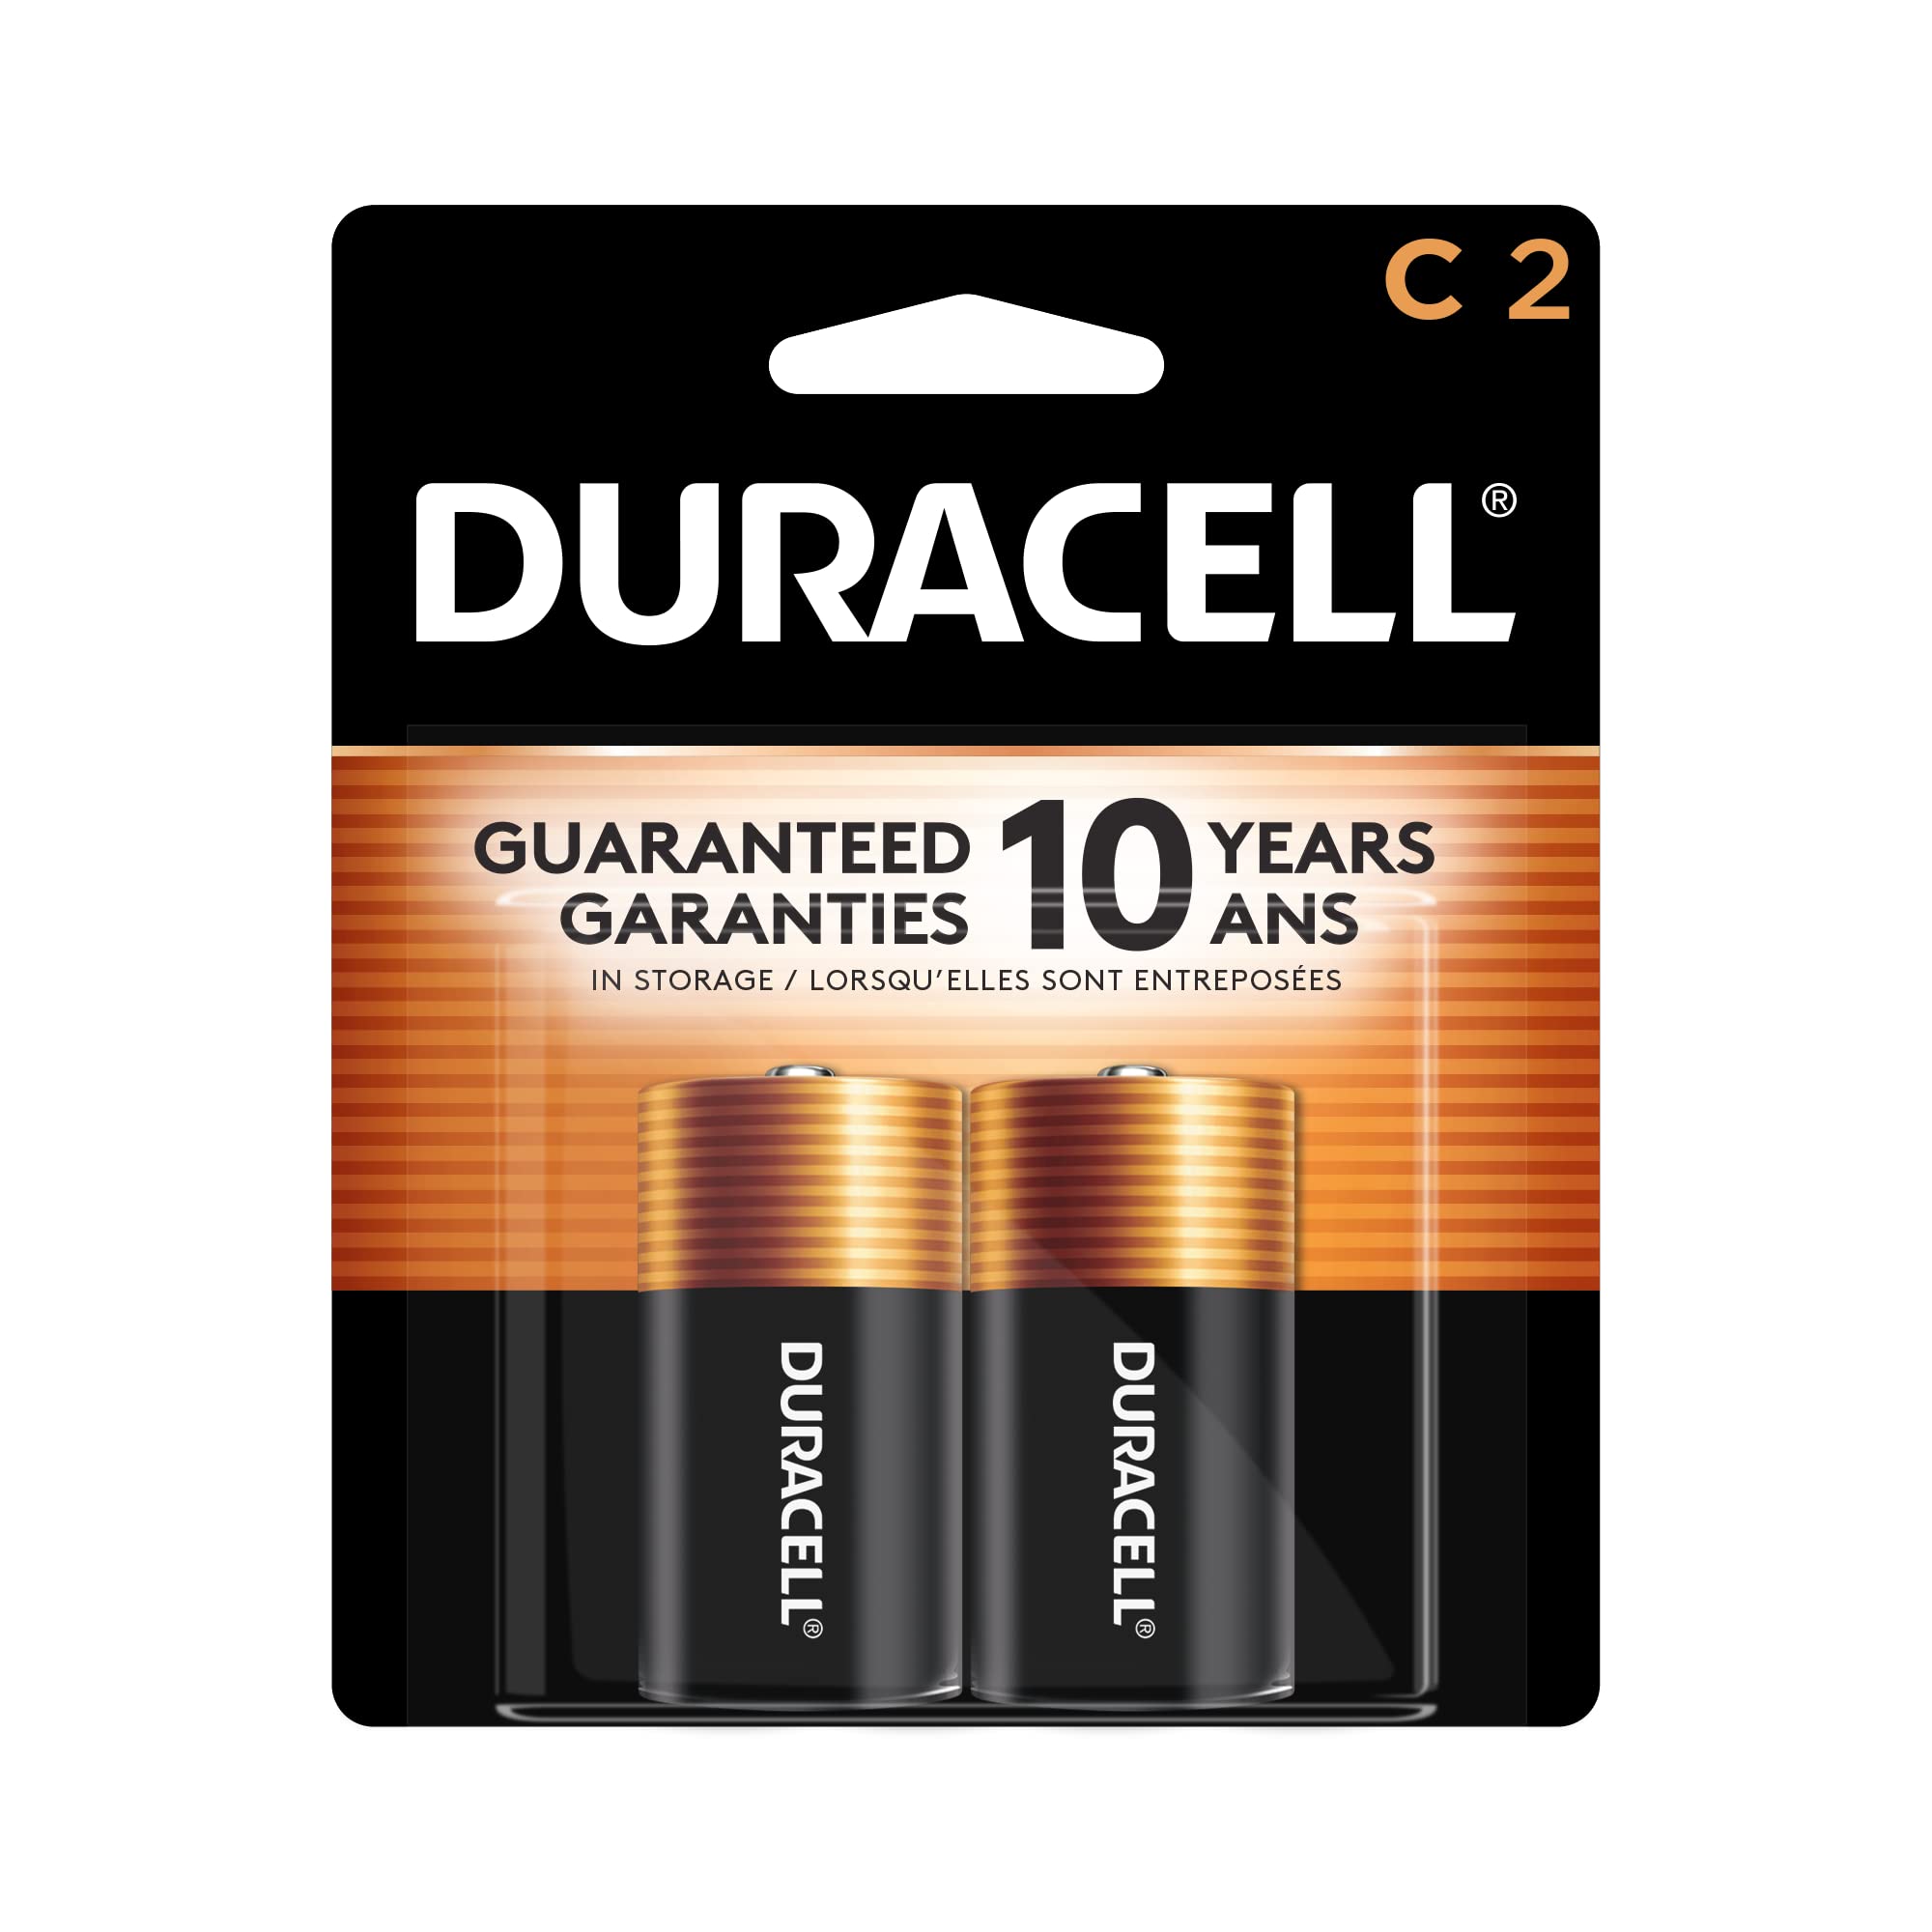 DURACELL Coppertop 1.5V Size C Alkaline Battery, (Pack of 10) - image 1 of 5